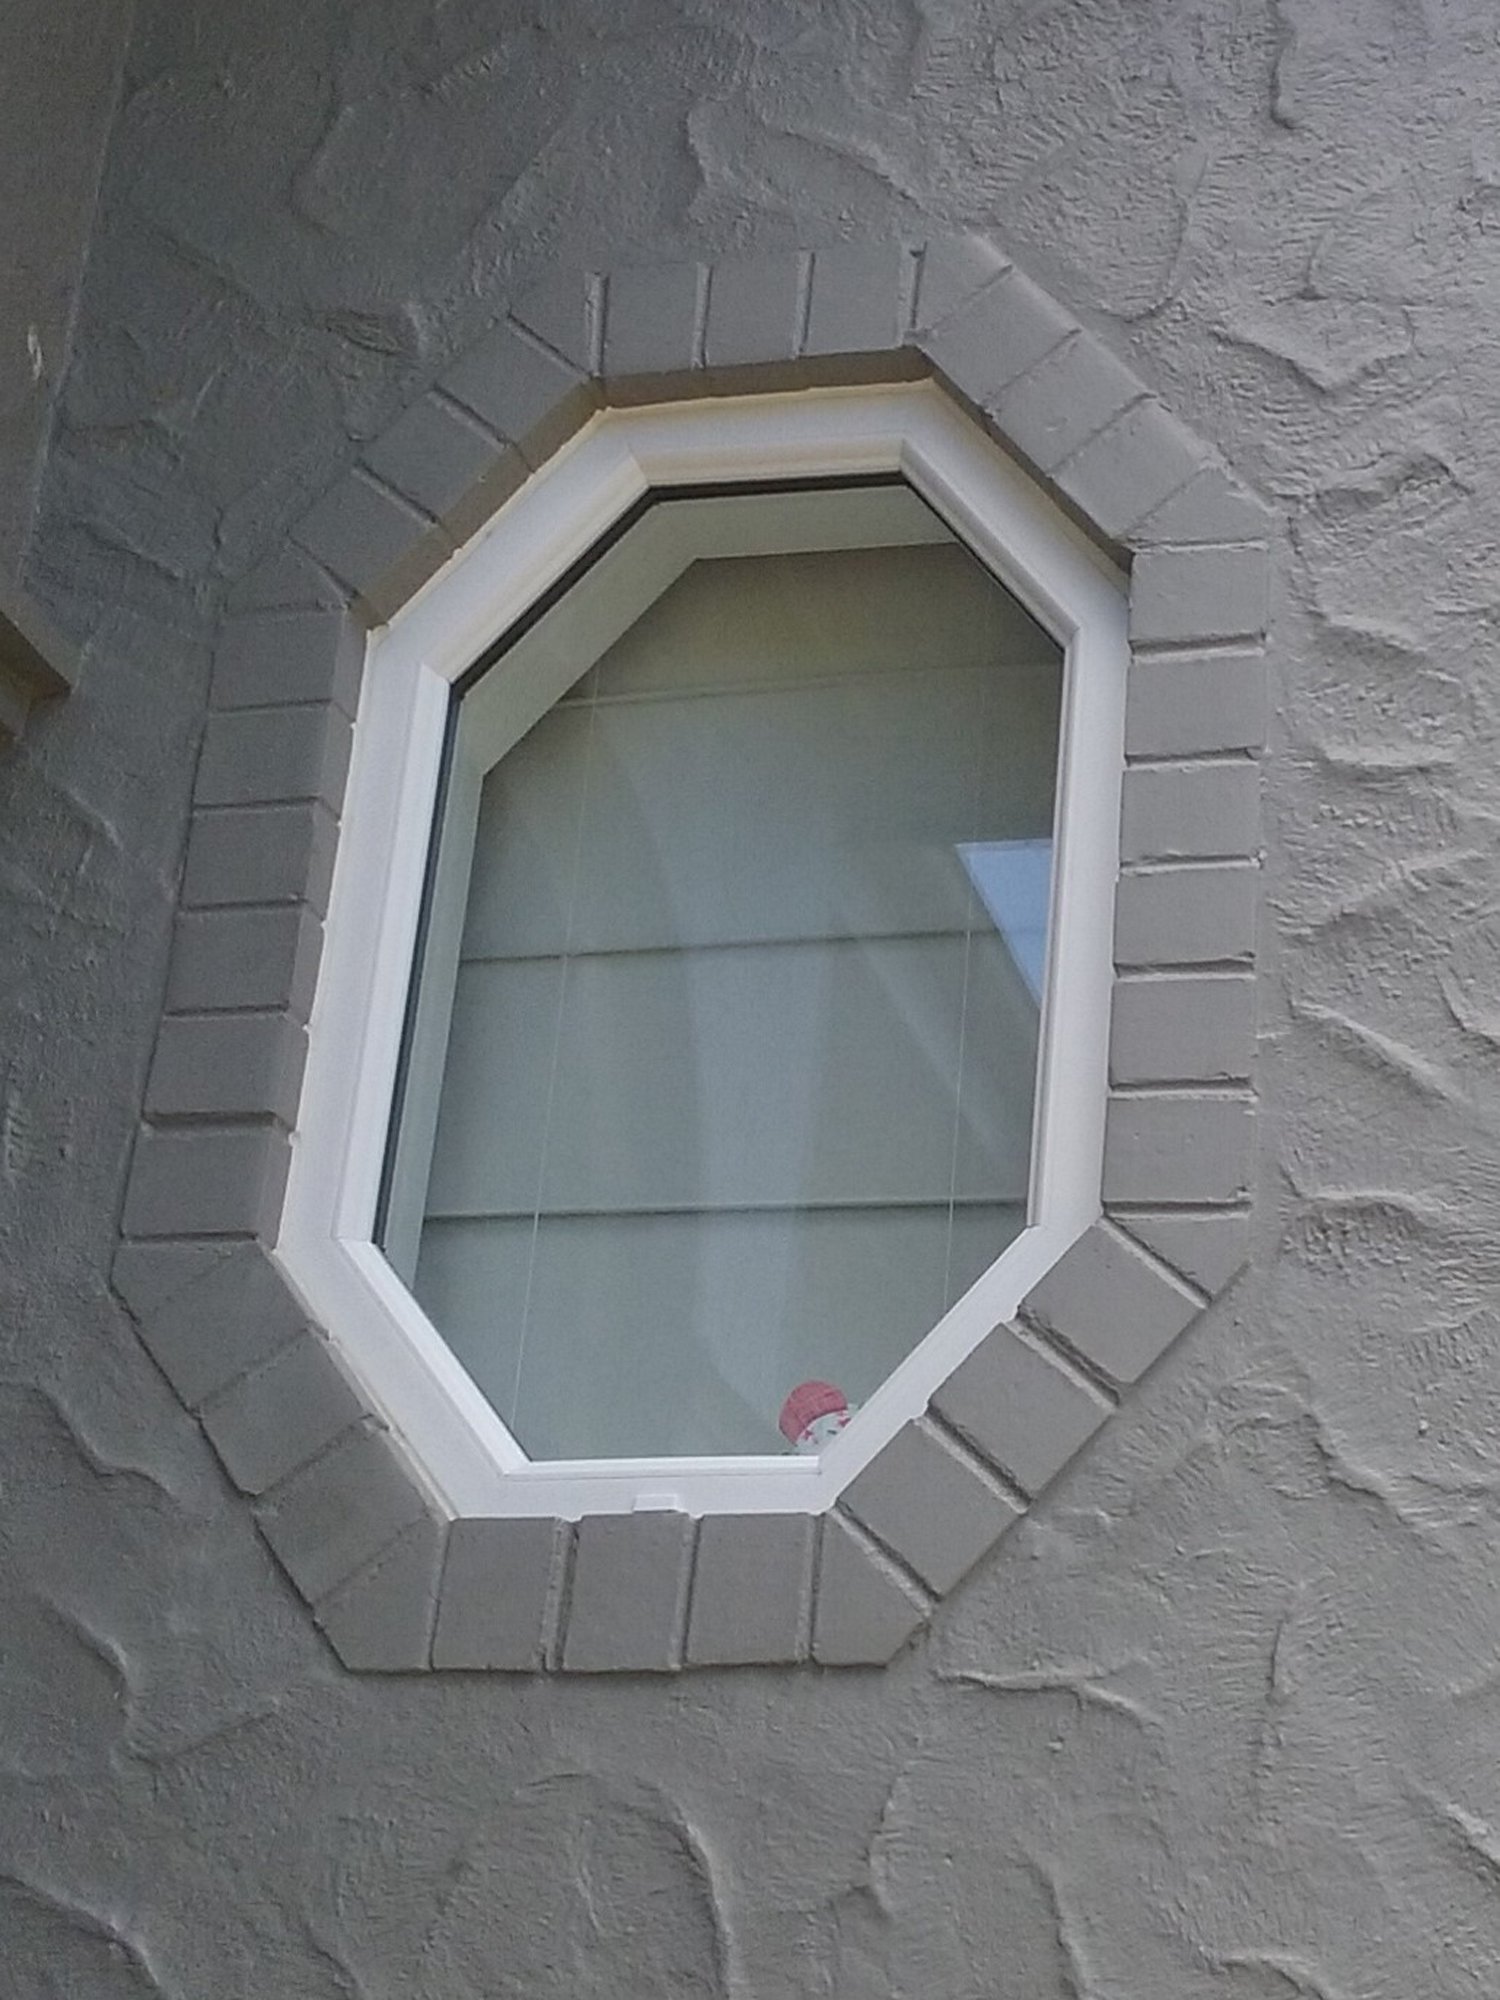 Small octagonal window with a white upvc window frame on a grey paved stone wall 